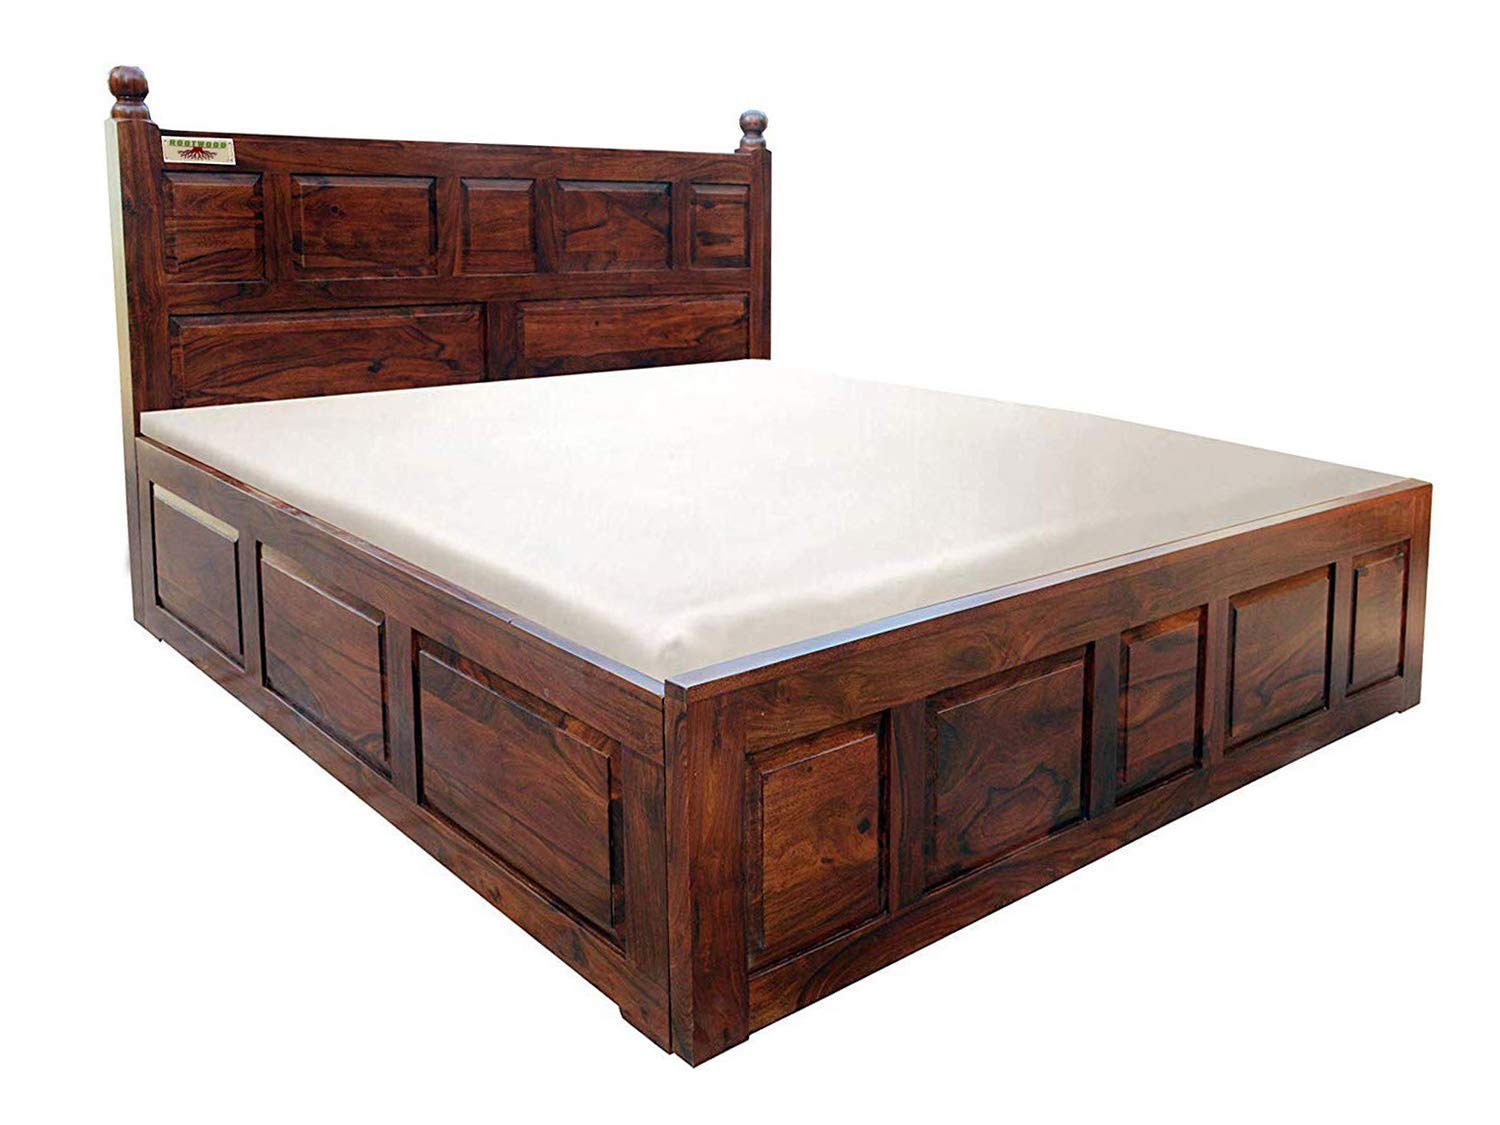 Bolivia Bed King Size Solid Wood Bed with Box Storage (Sheesham Wood - Walnut)